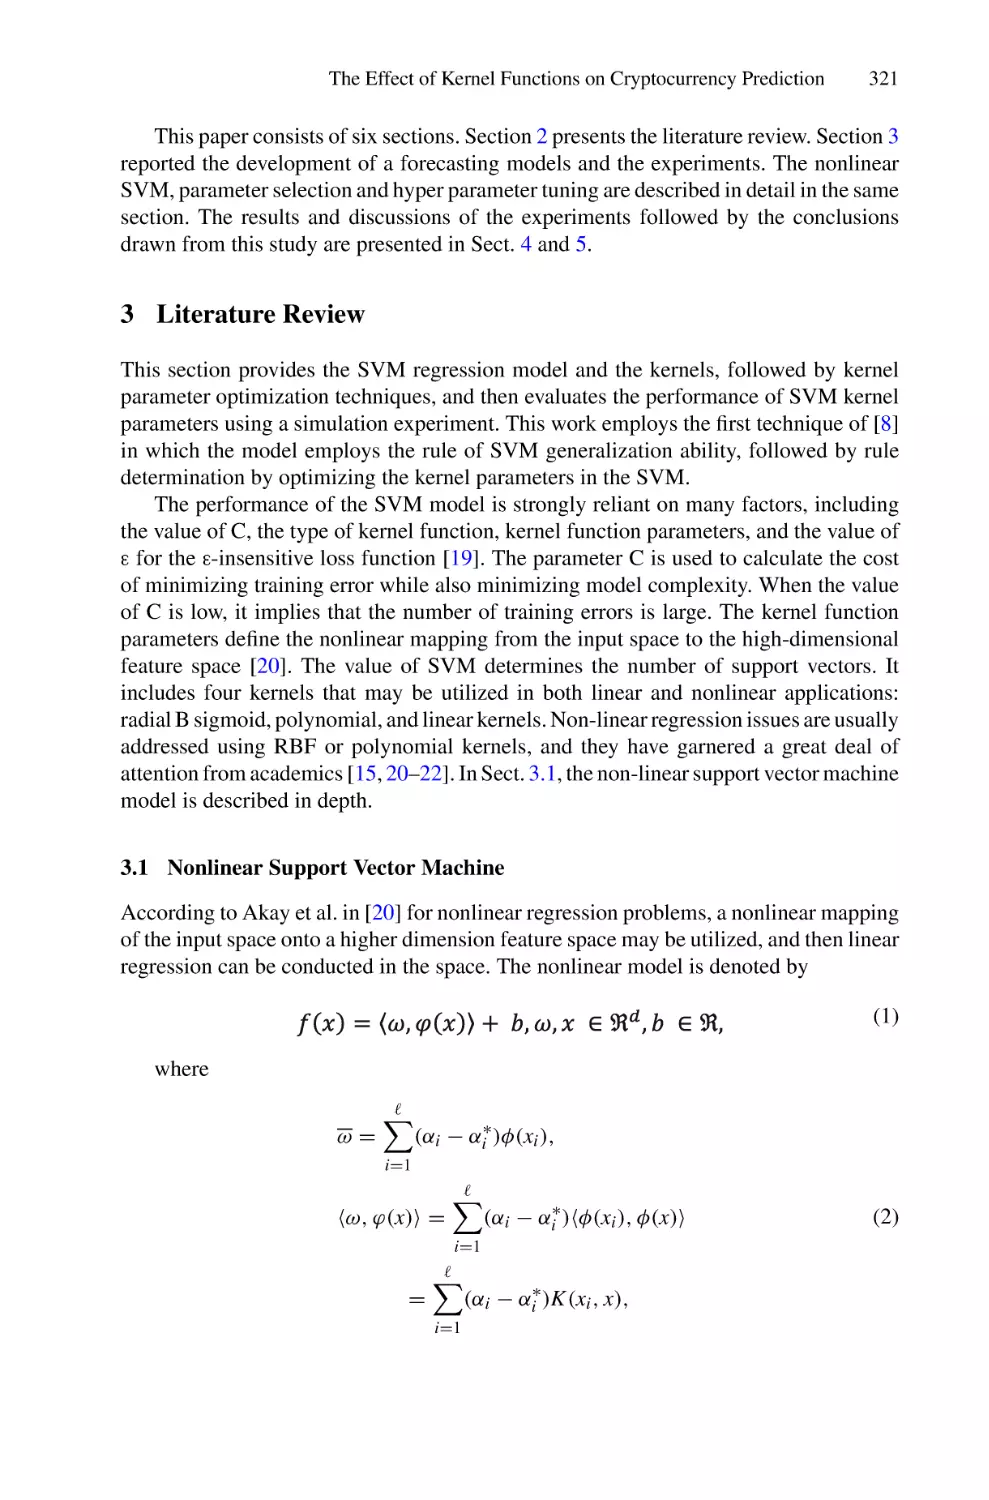 3 Literature Review
3.1 Nonlinear Support Vector Machine